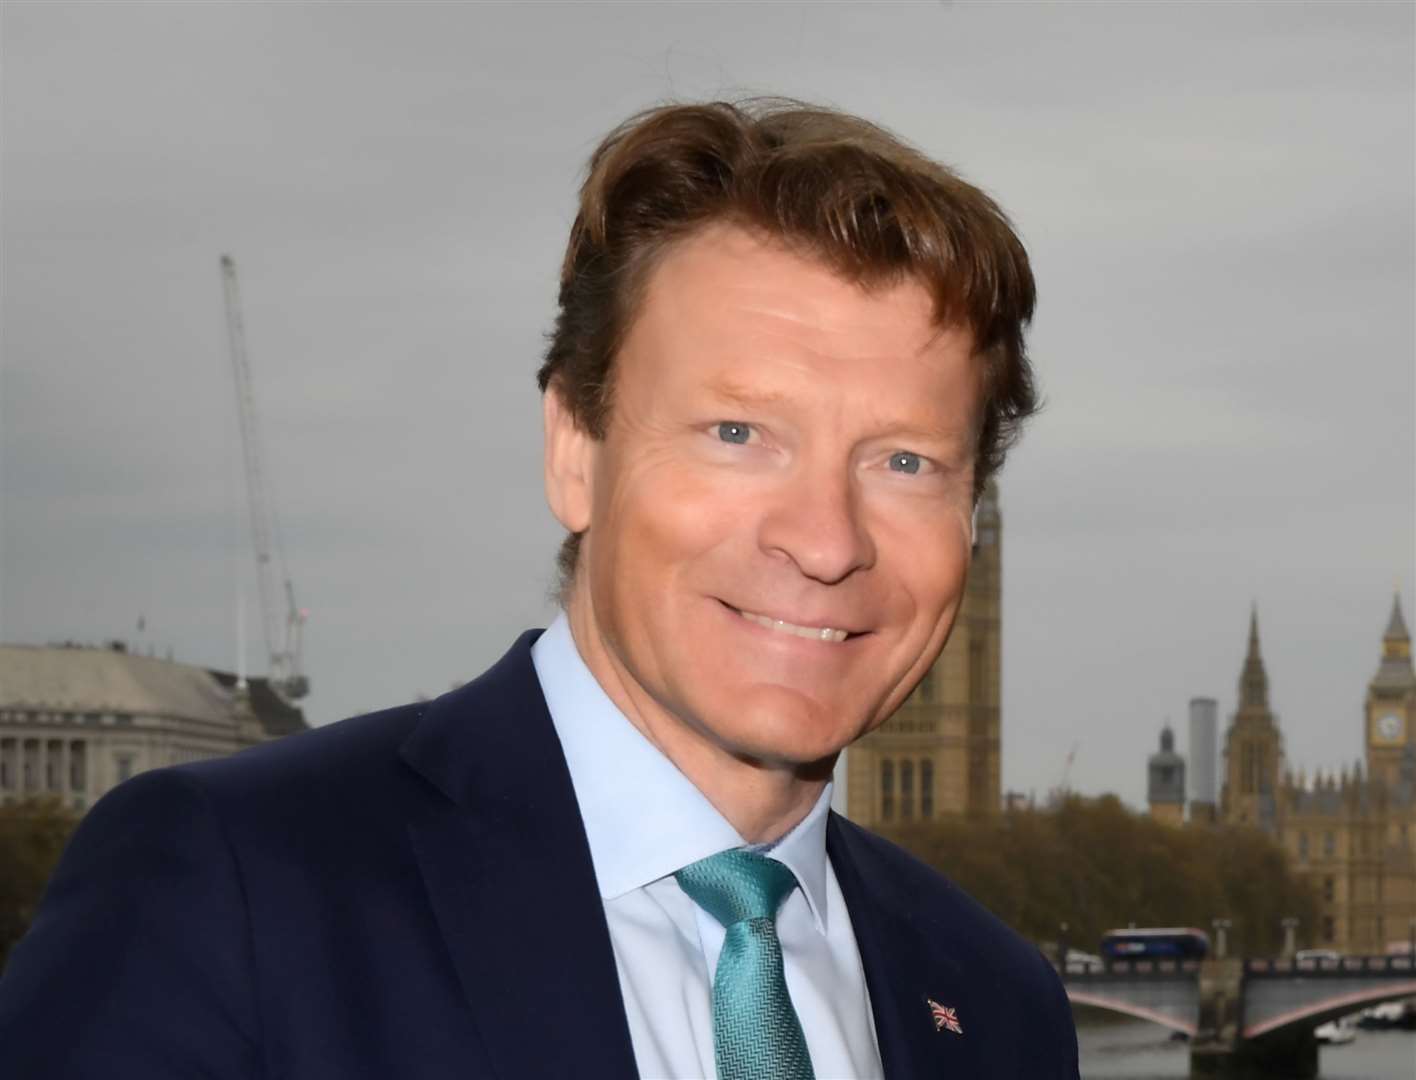 Reform Party leader Richard Tice says the country has been failed by the Conservatives